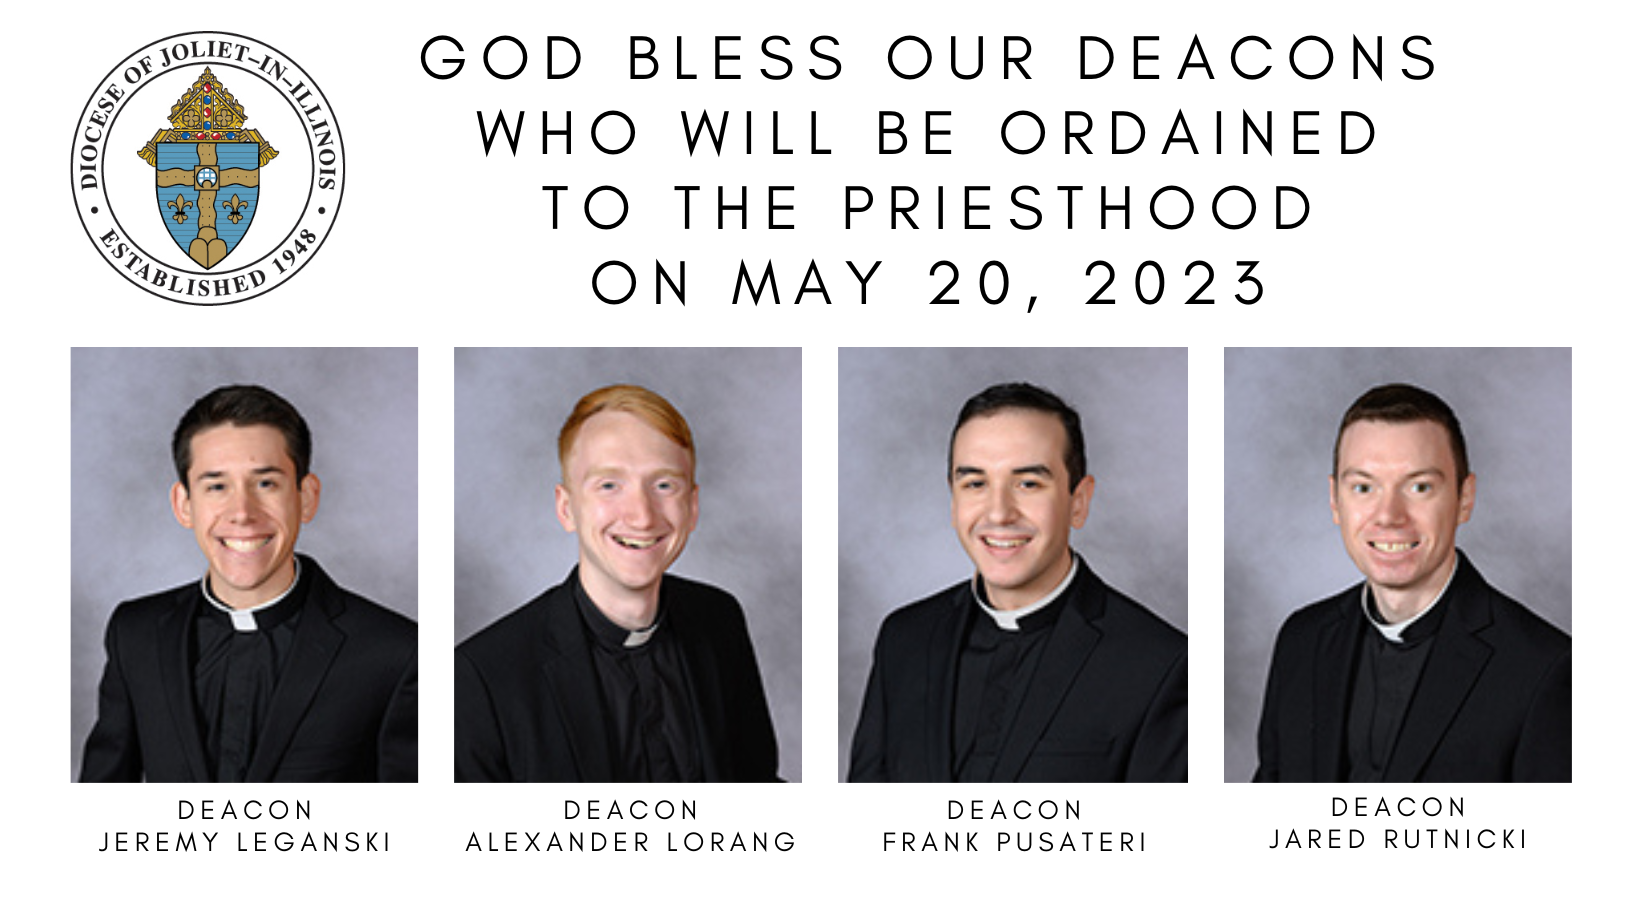 Opening image of 4 of the deacons to be ordained on May 20, 2023.  